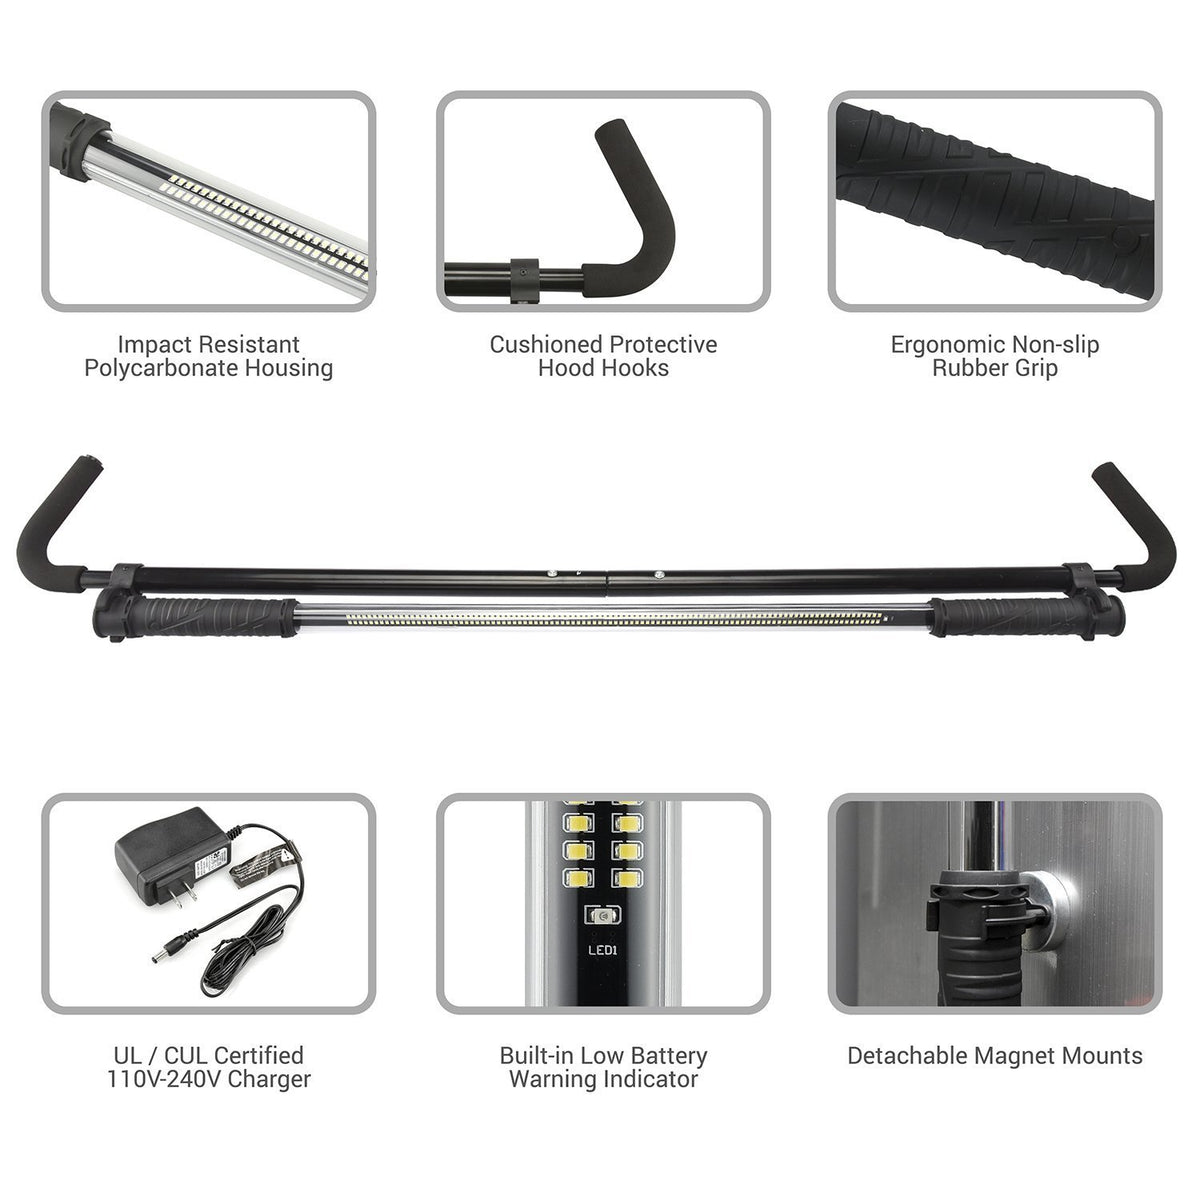 Cordlesss Rechargeable Underhood Work Light Bar With hooks 202 SMD 8,000 mAh